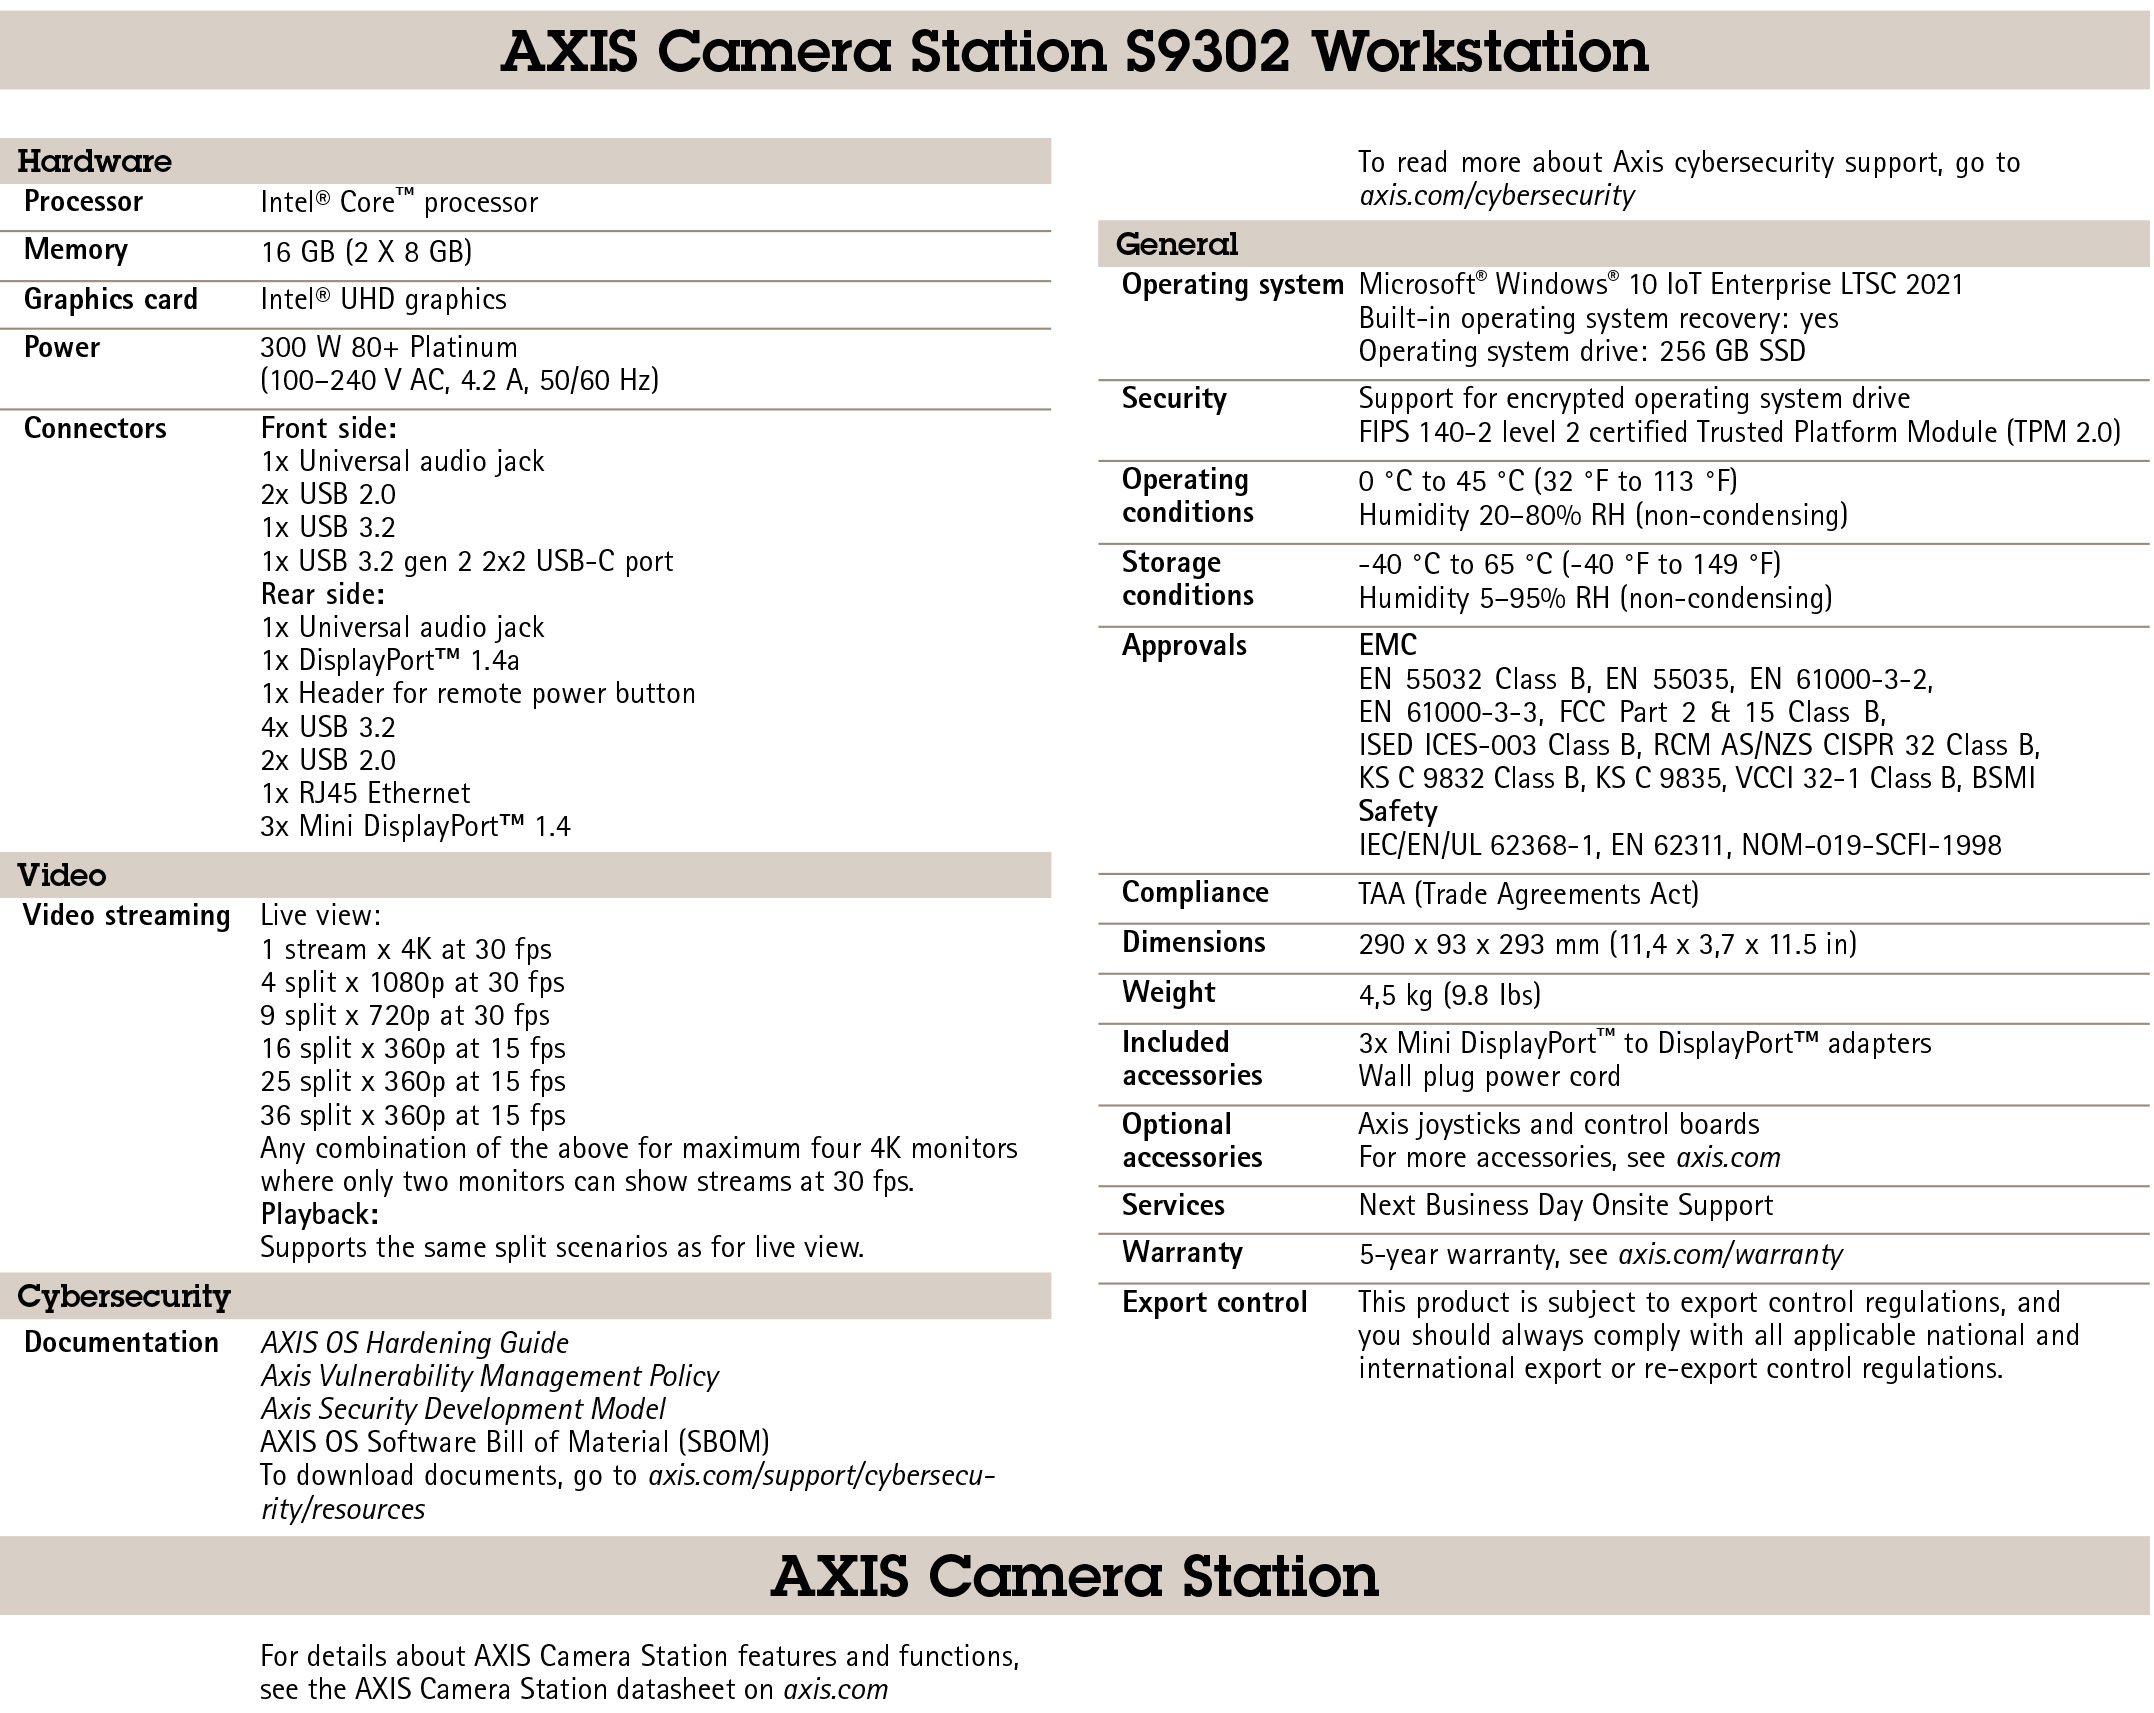 AXIS Camera Station S9302 Workstation